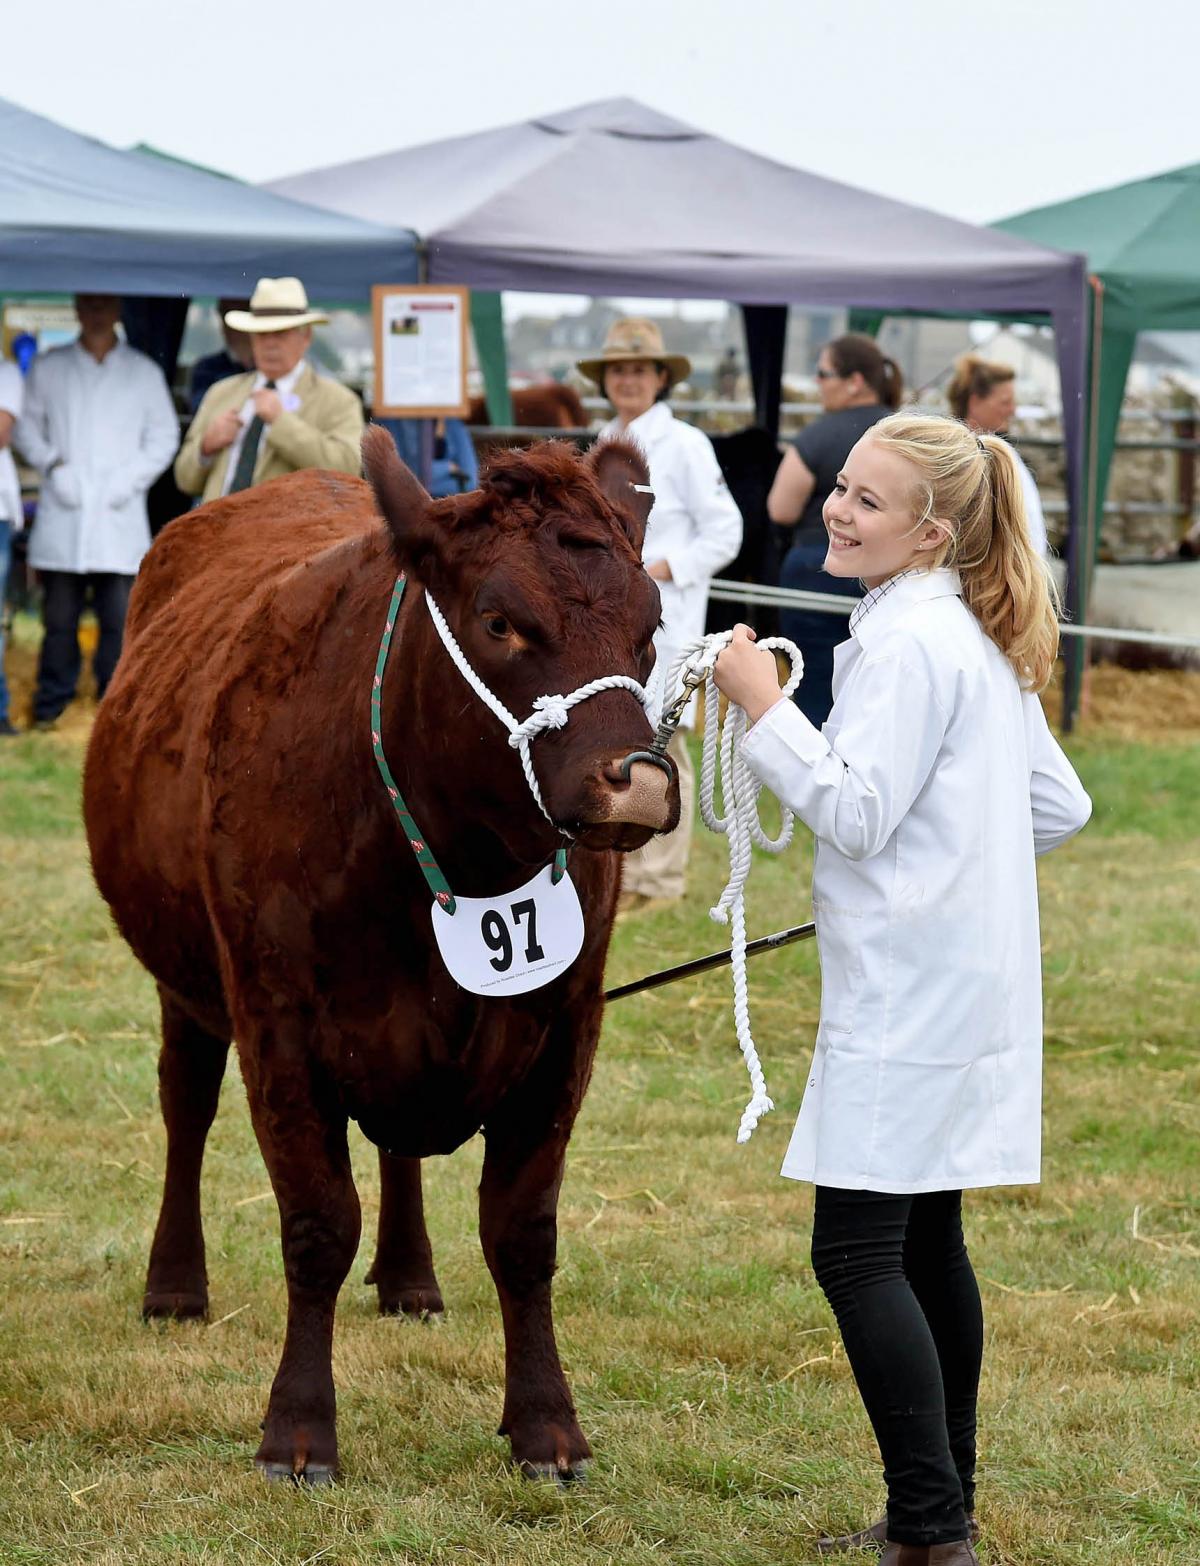 The Melplash Show 2016 at West Bay Showground, Pictures: FINNBARR WEBSTER